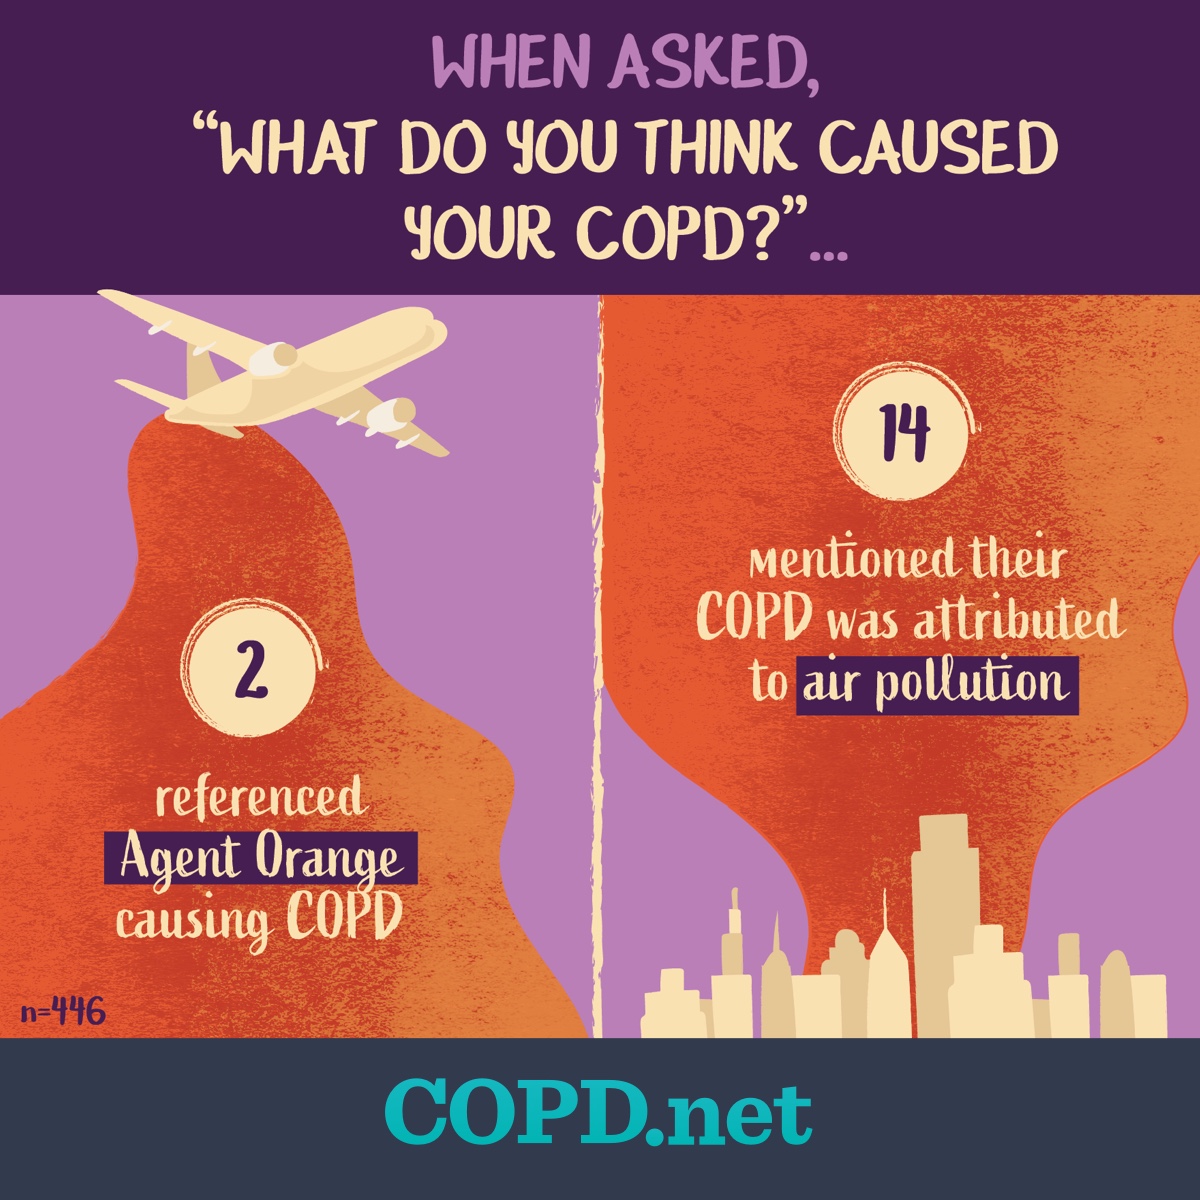 2 people referenced agent orange and 14 mentioned air pollution when talking about what they think caused their COPD